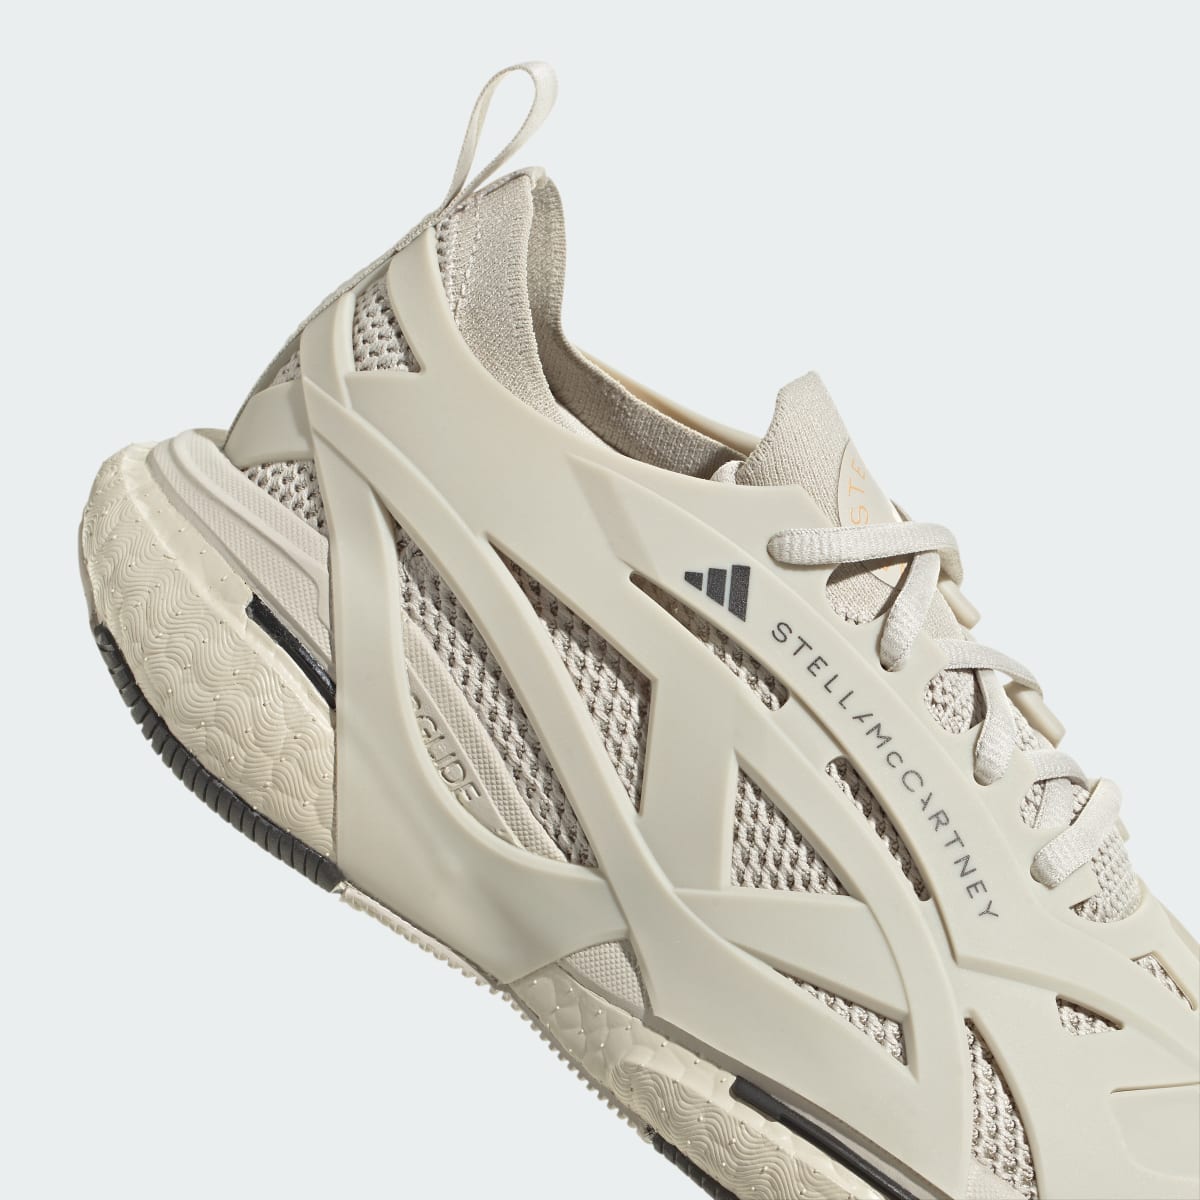 Adidas by Stella McCartney Solarglide Shoes. 9